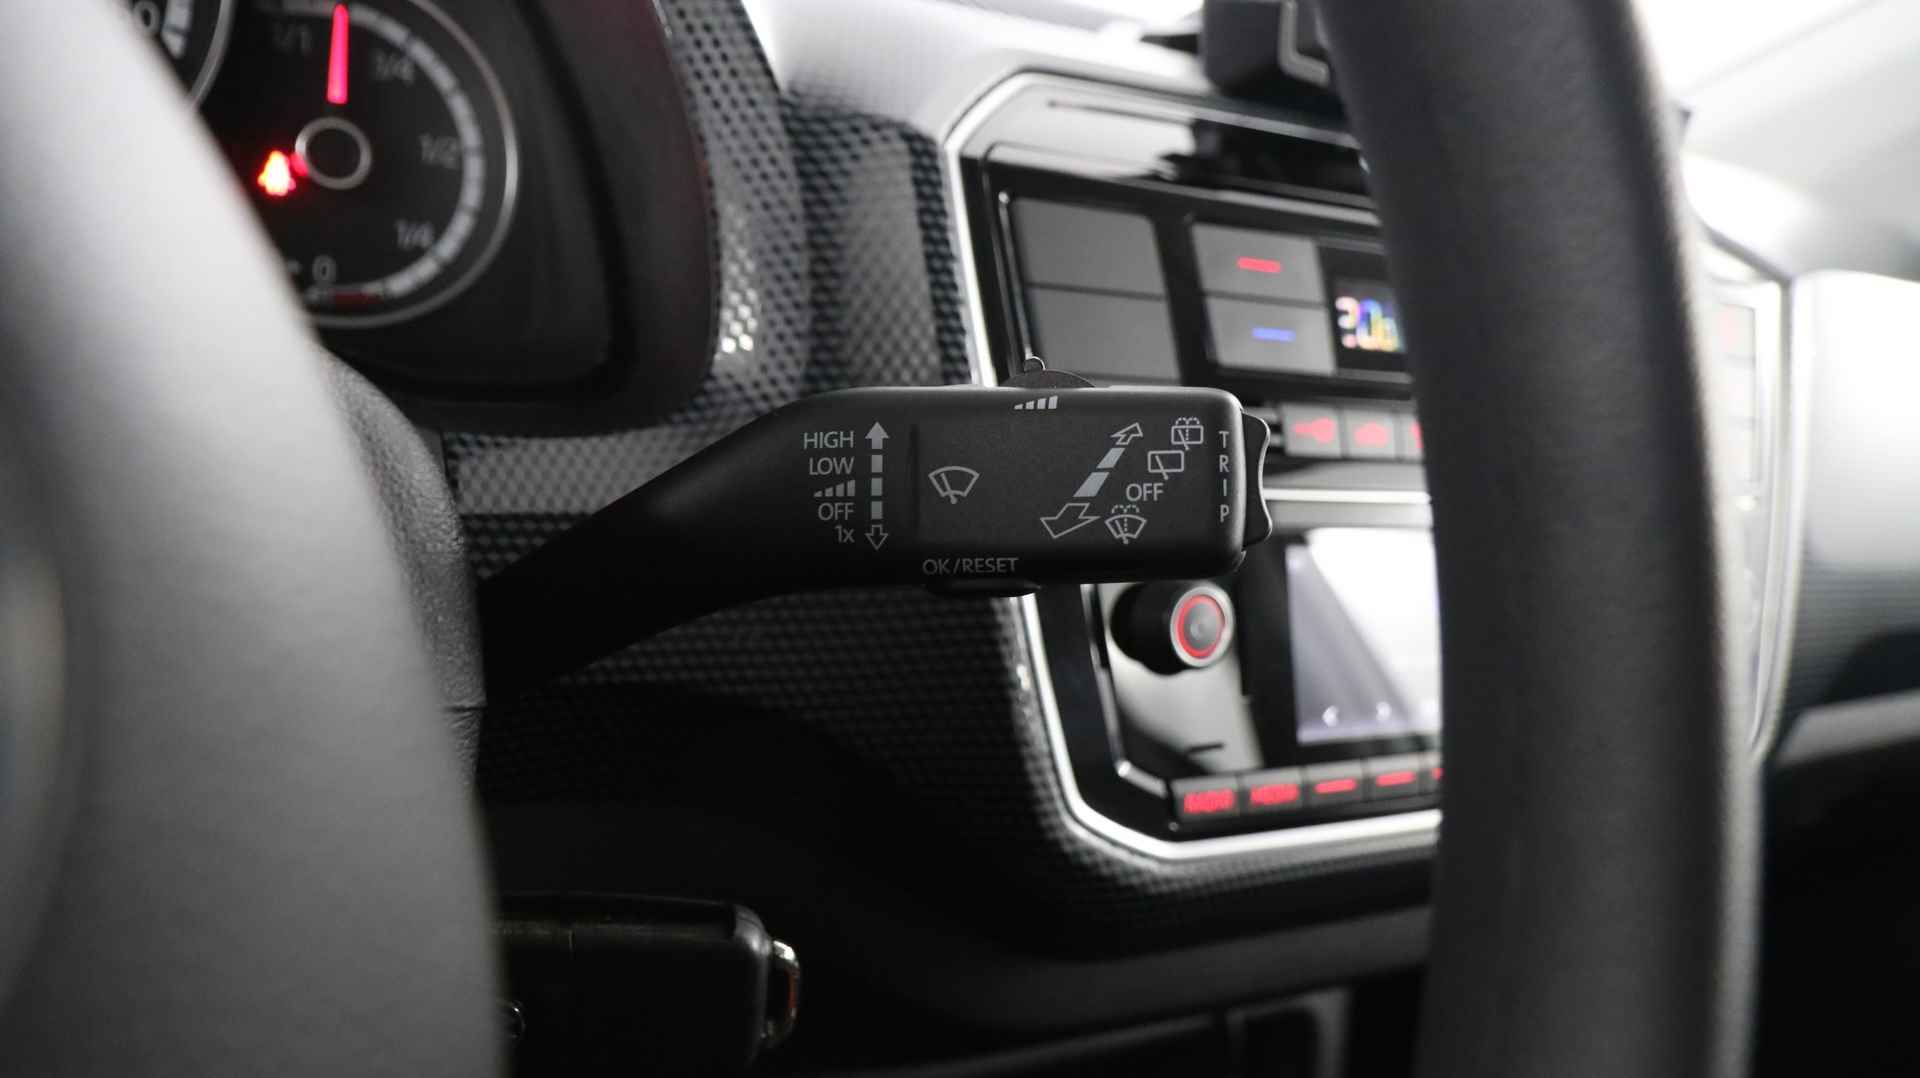 Volkswagen e-Up! e-up! / Airco / Climate control / Wordt verwacht - 19/28